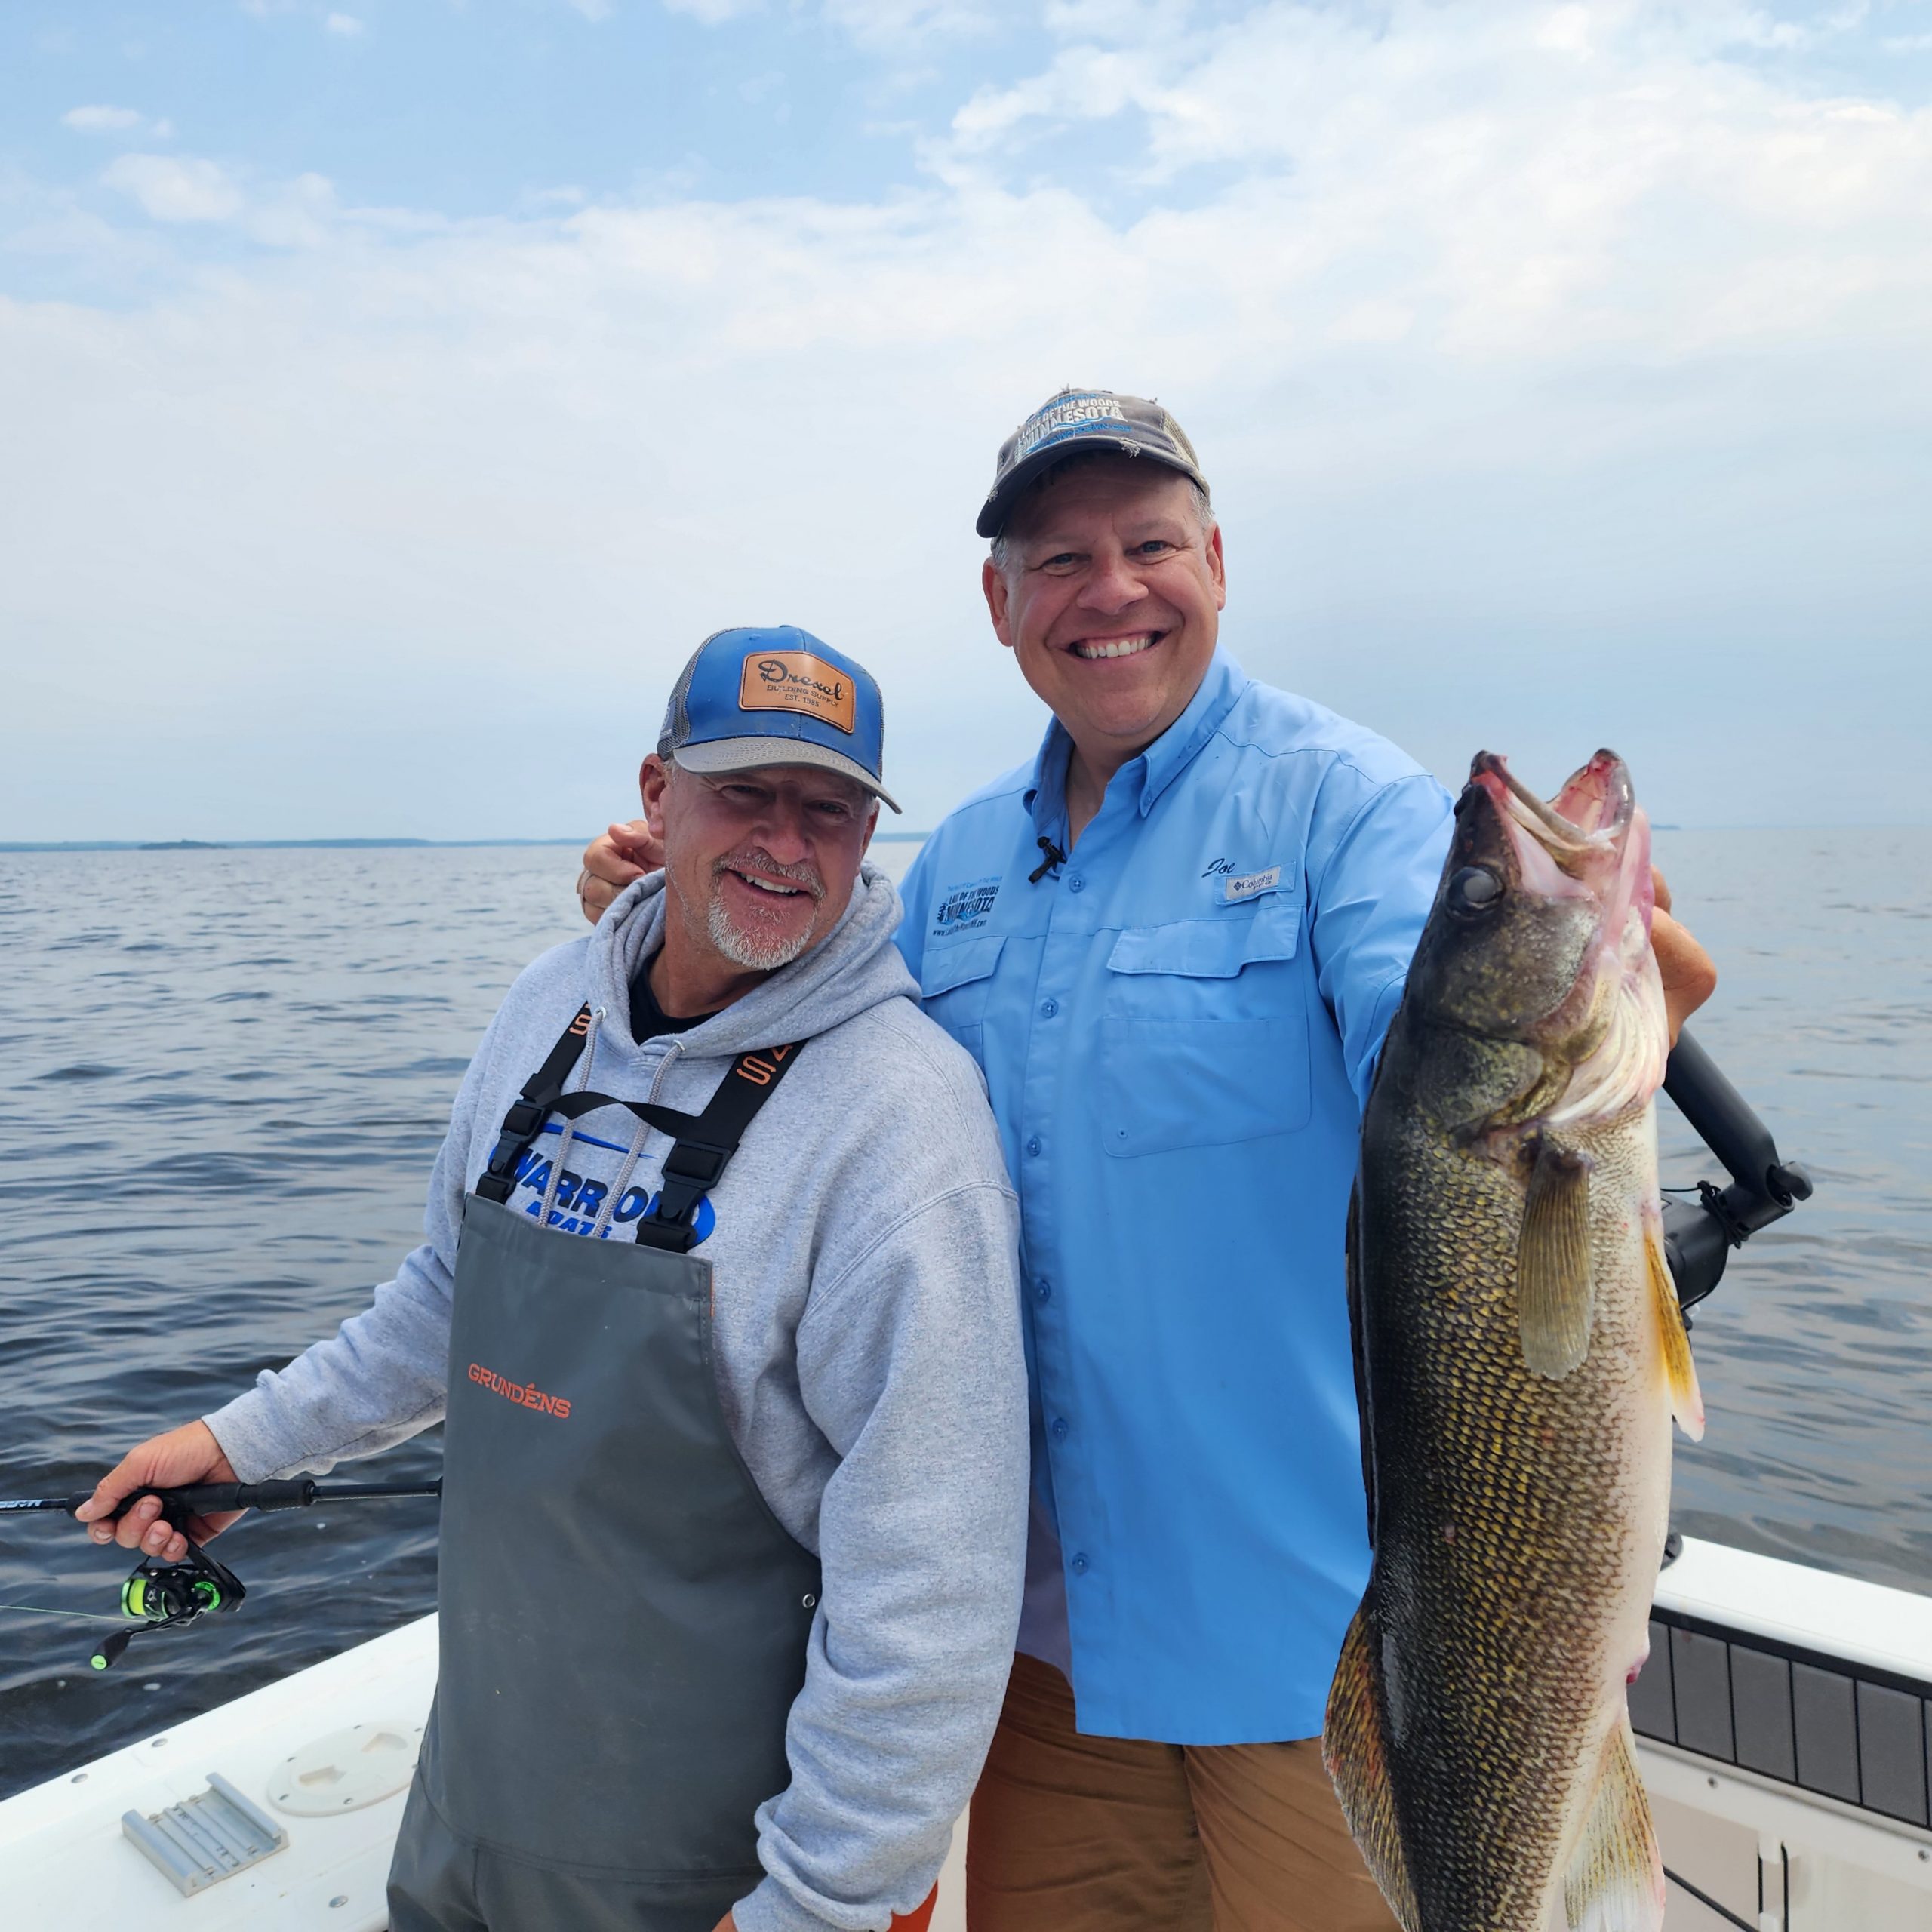 Walleye fishing guide, Our Adventures